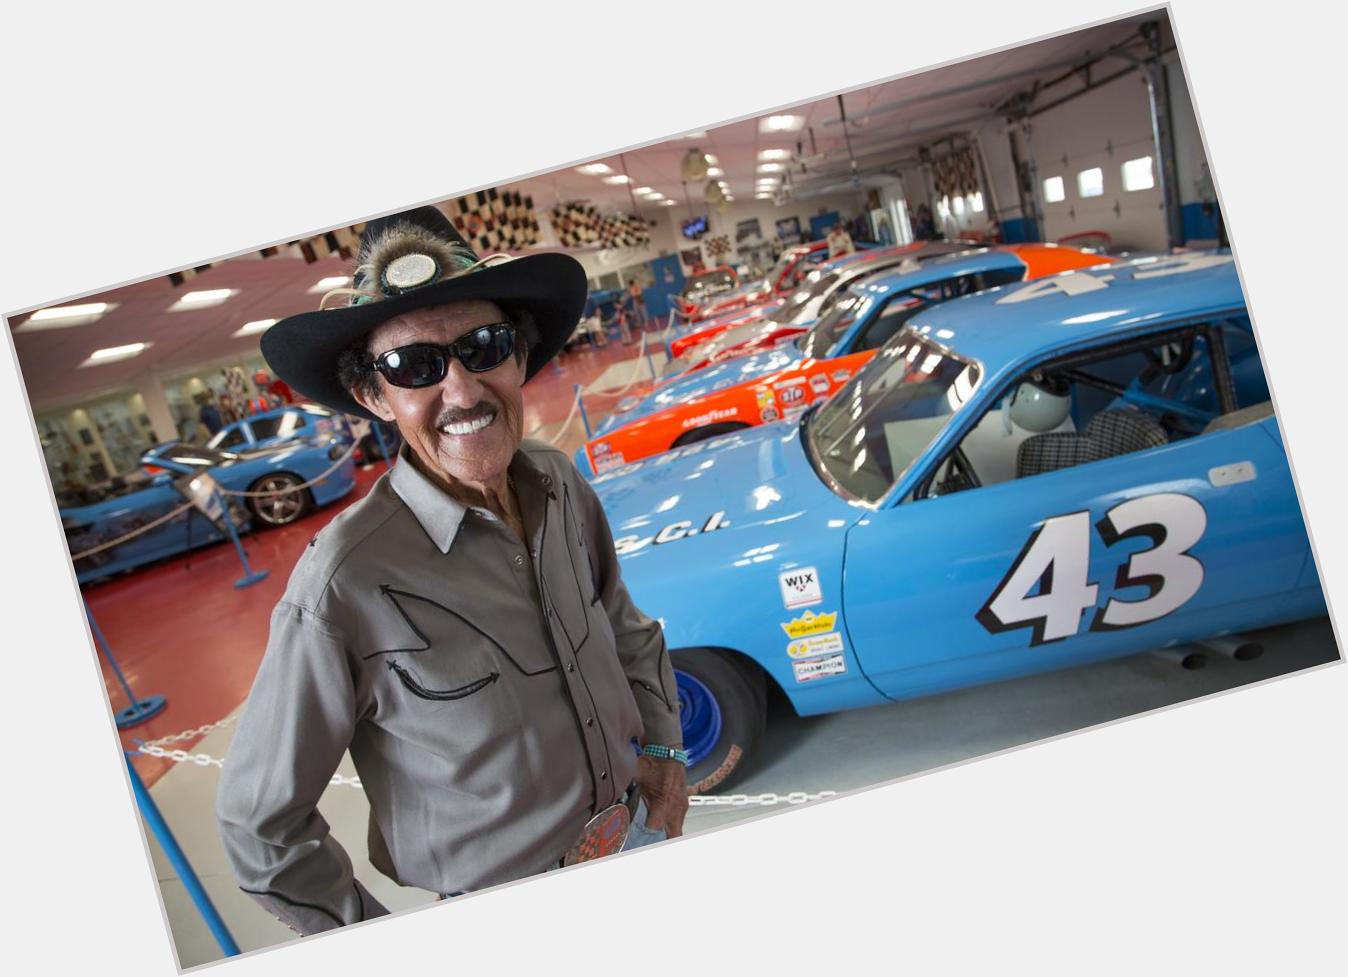 Wishing a very Happy Birthday to one of the newest members of the CSE family, Richard Petty! 